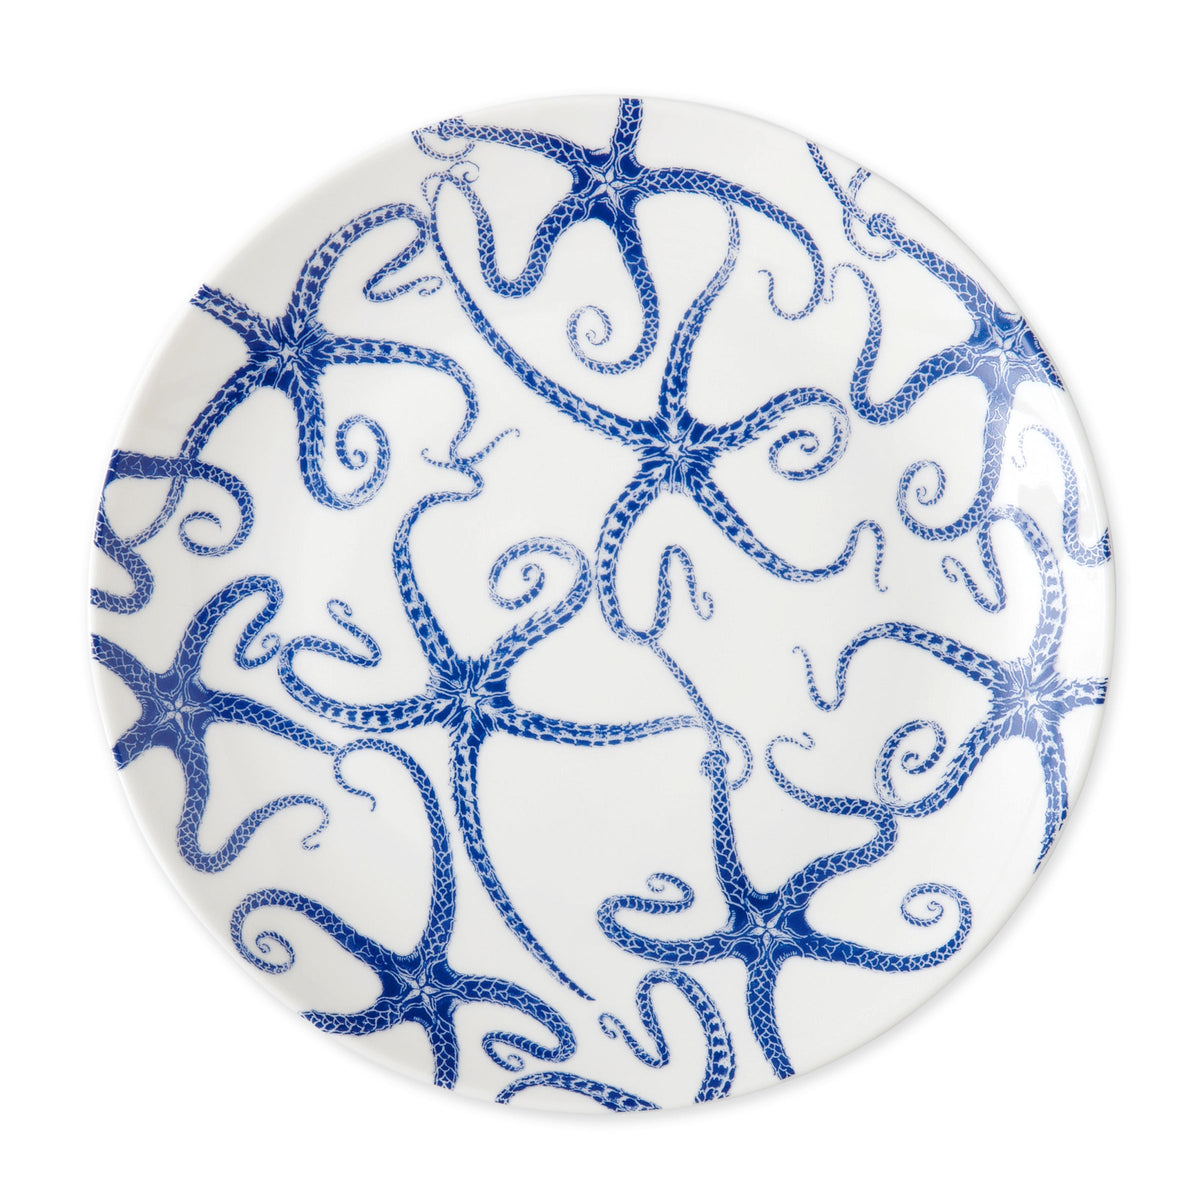 A premium porcelain plate from the Starfish Starter Set by Caskata with an octopus design.